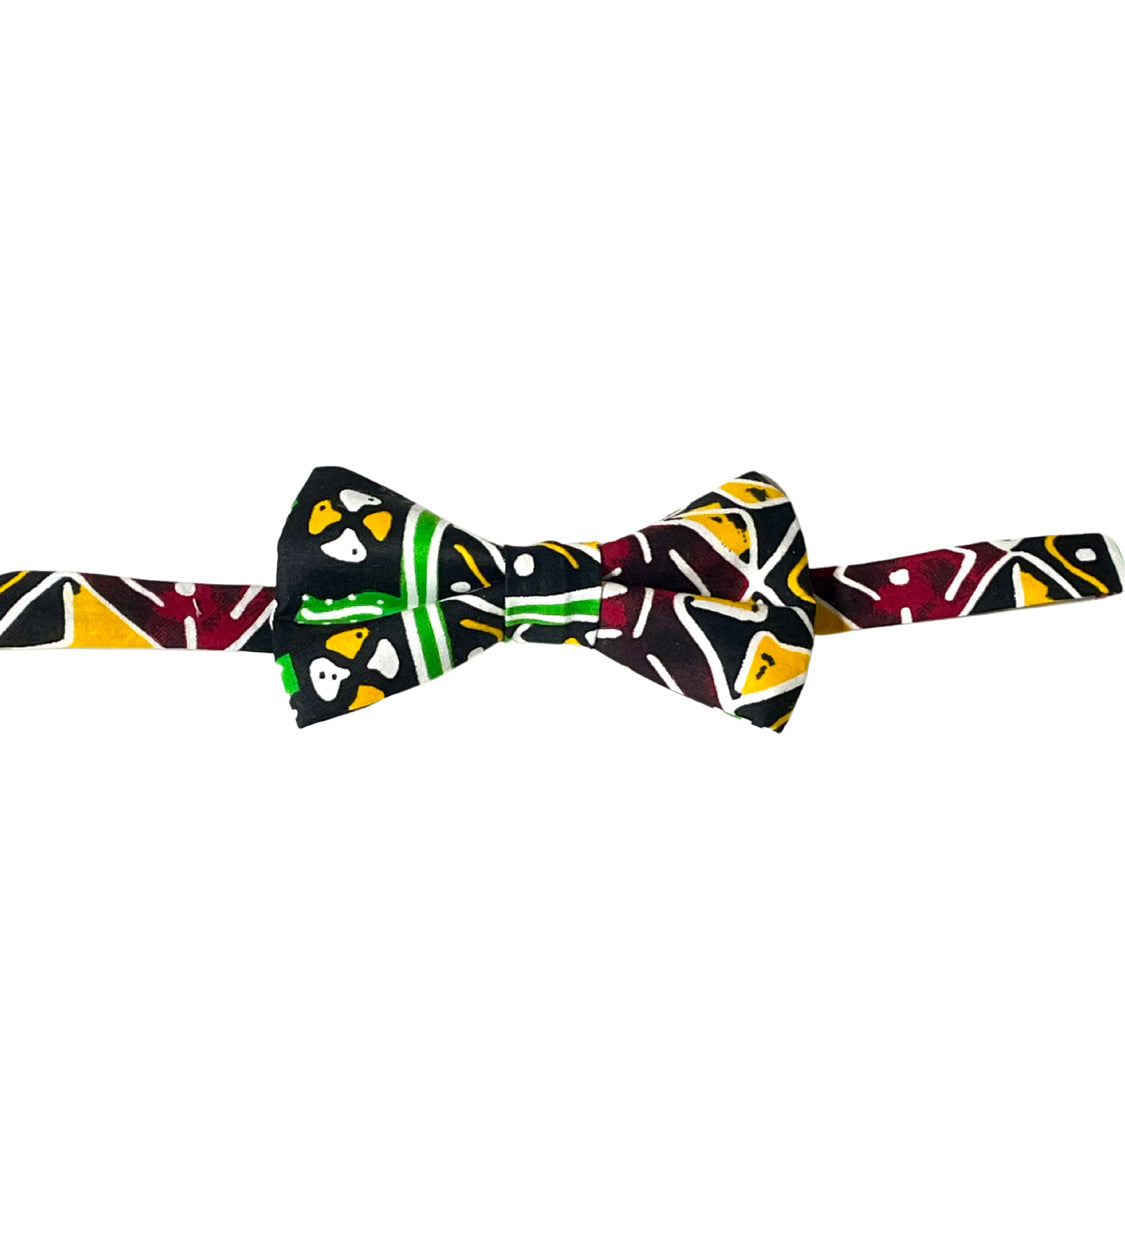 Black Reggae bow tie with red, green and yellow geometric design bow tie. This bow tie is one of our African print bow ties in 4 prints. Also available with a pocket square to make a stylish bow tie set.